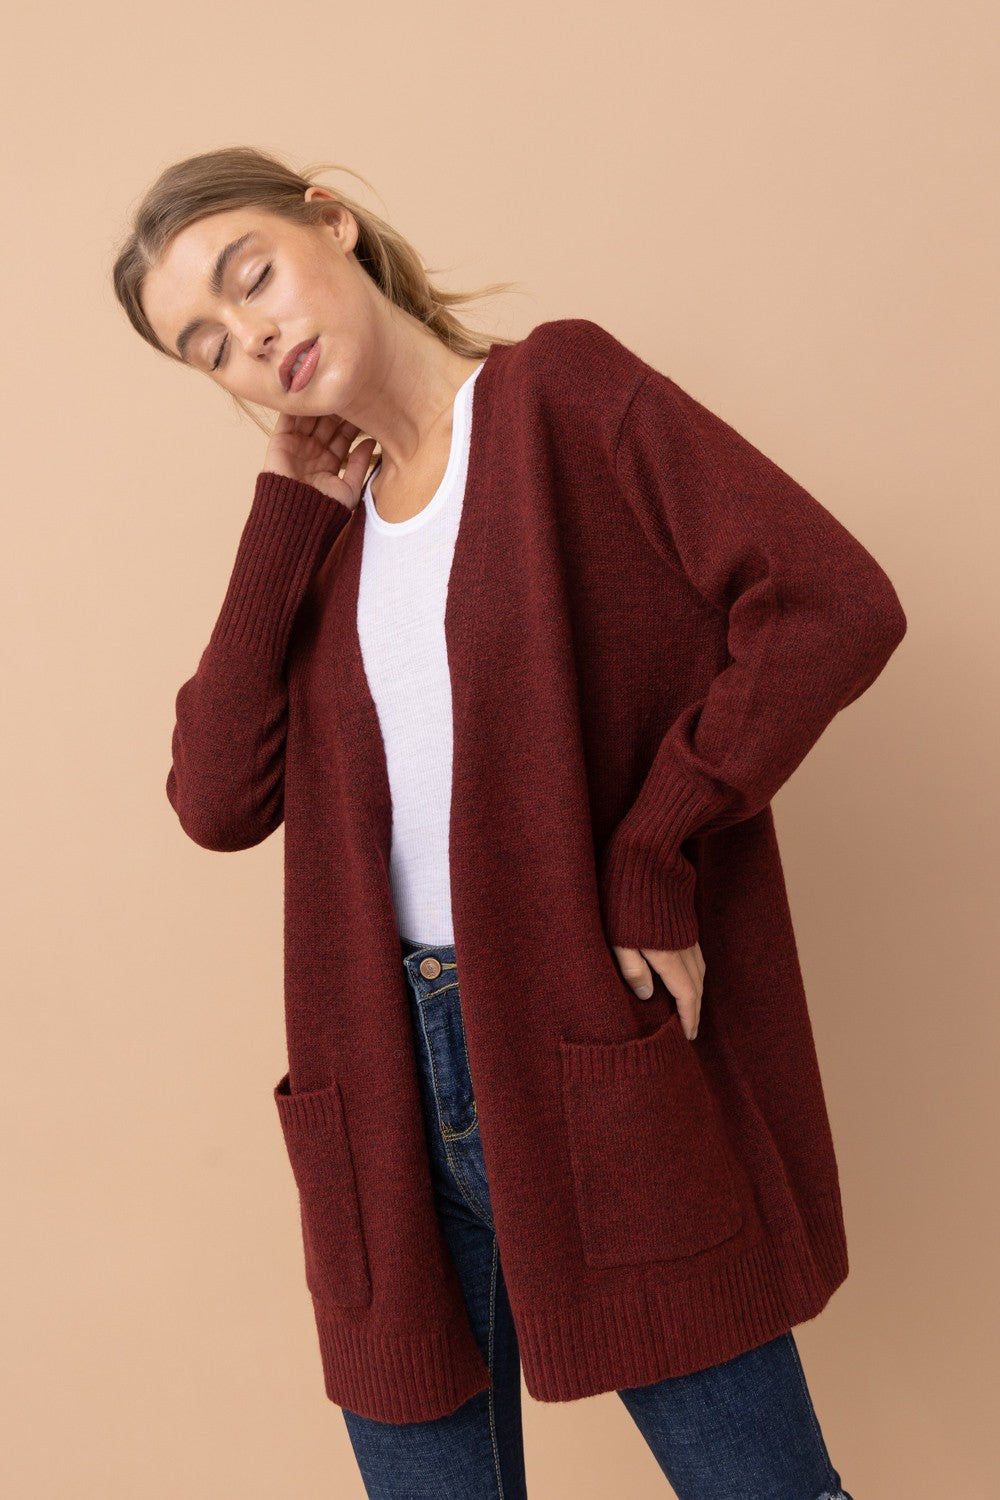 Open Front Cardigan - 2 Colors